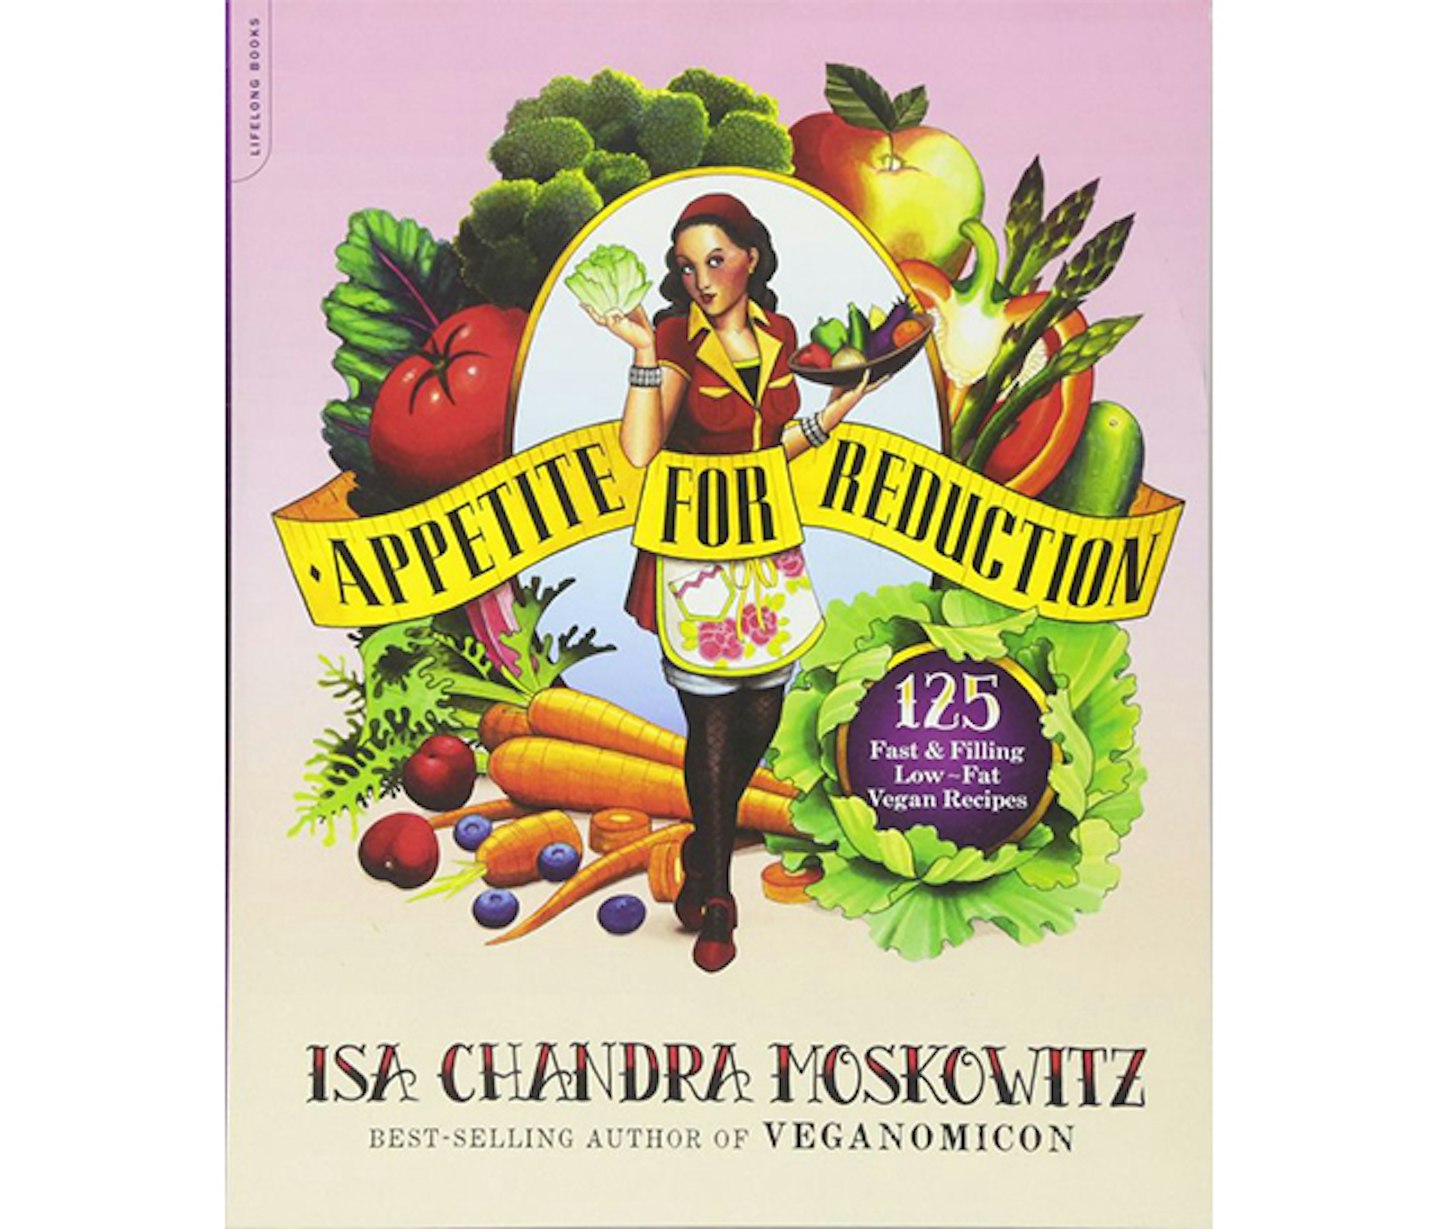 Appetite for Reduction: 125 Fast and Filling Low-Fat Vegan Recipes by Isa Chandra Moskowitz